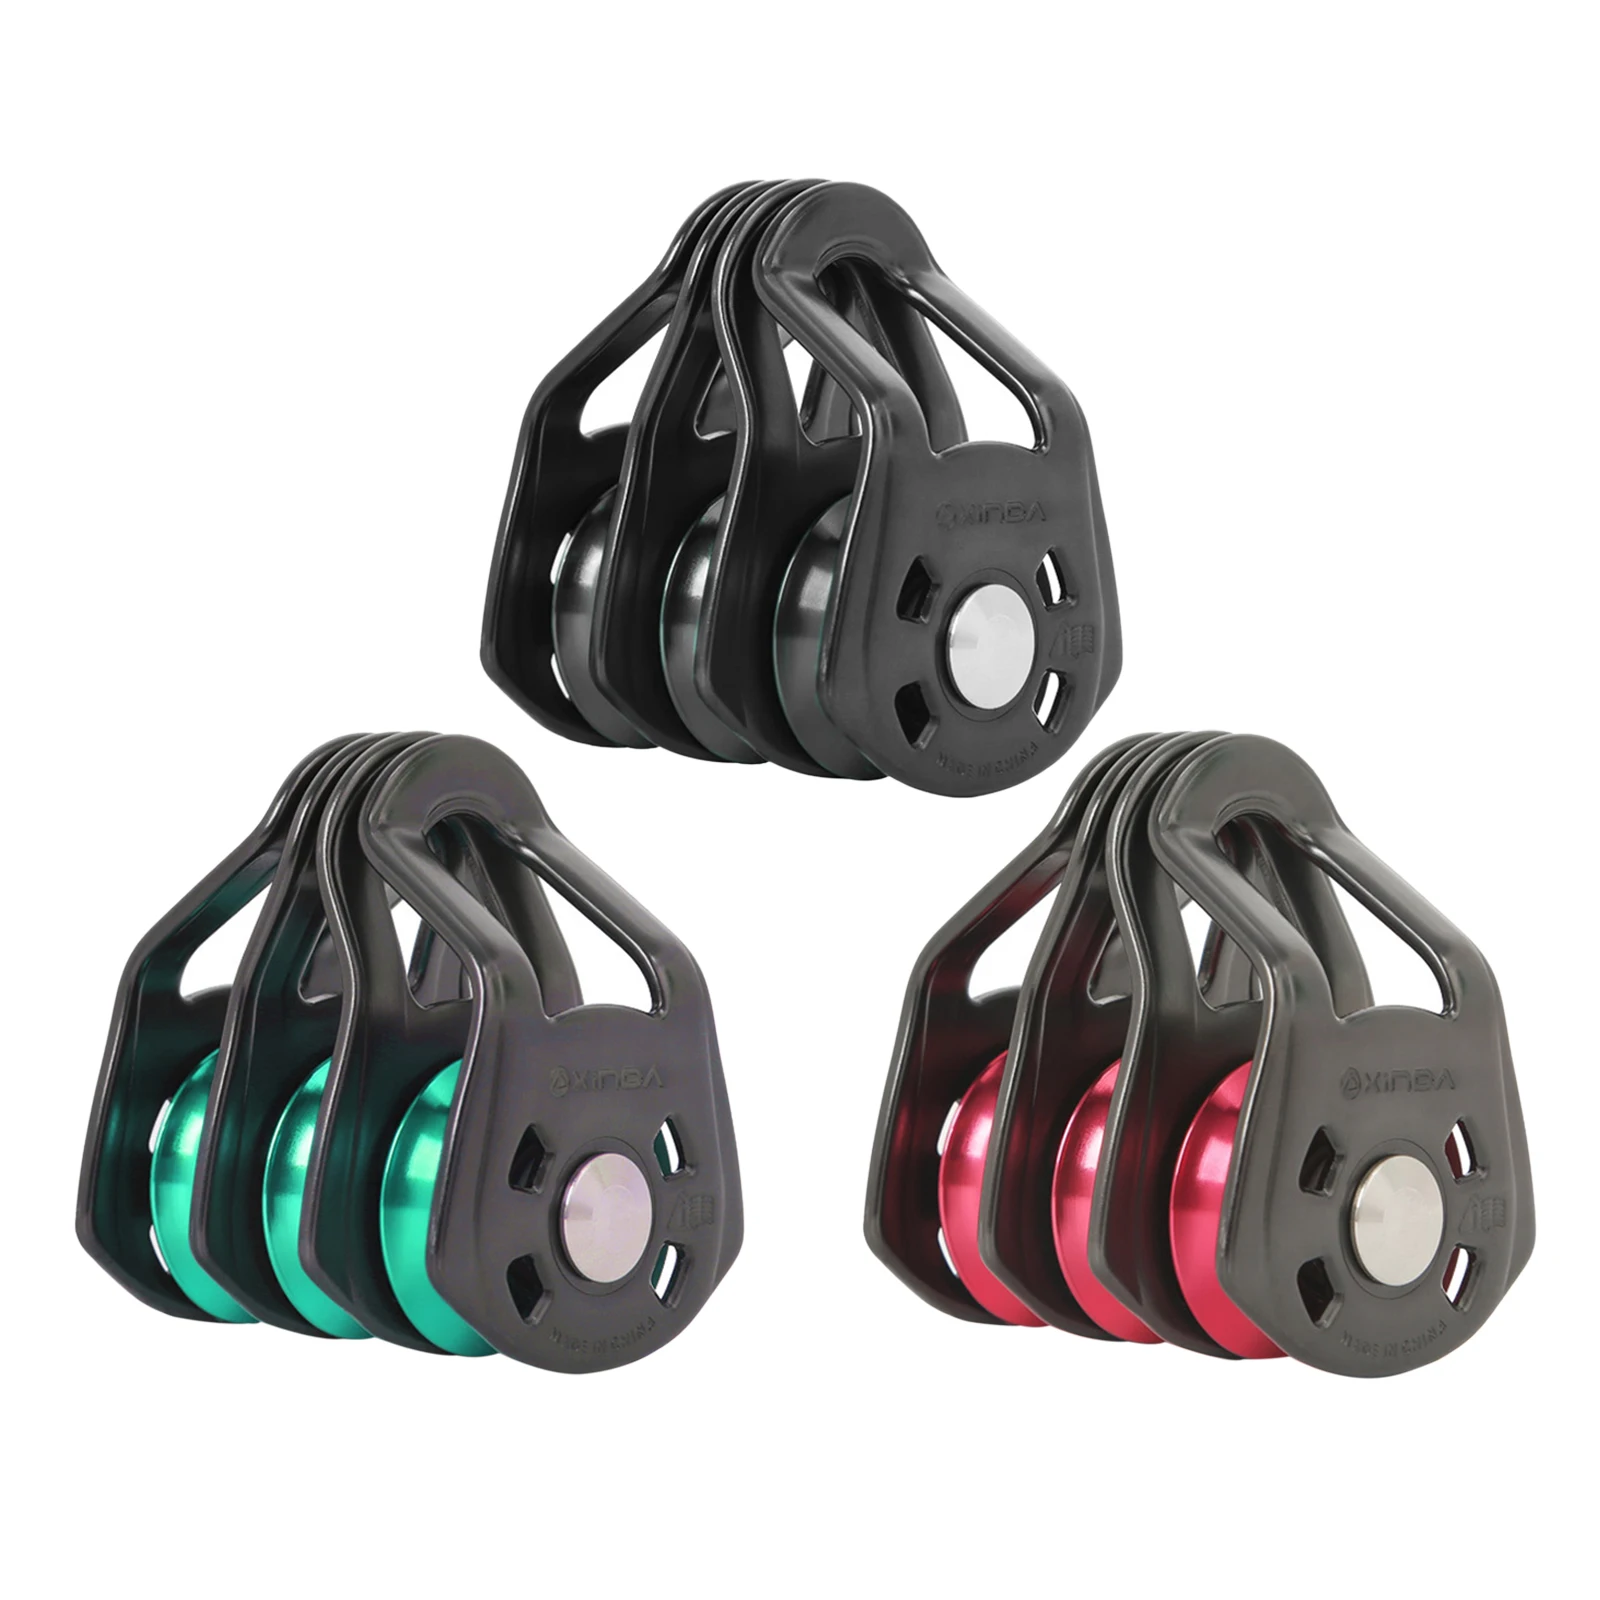 Rock Climbing Pulley Fixed Sideplate Three Sheave Pulley Outdoor Survival Tool High Altitud  Hauling Gear